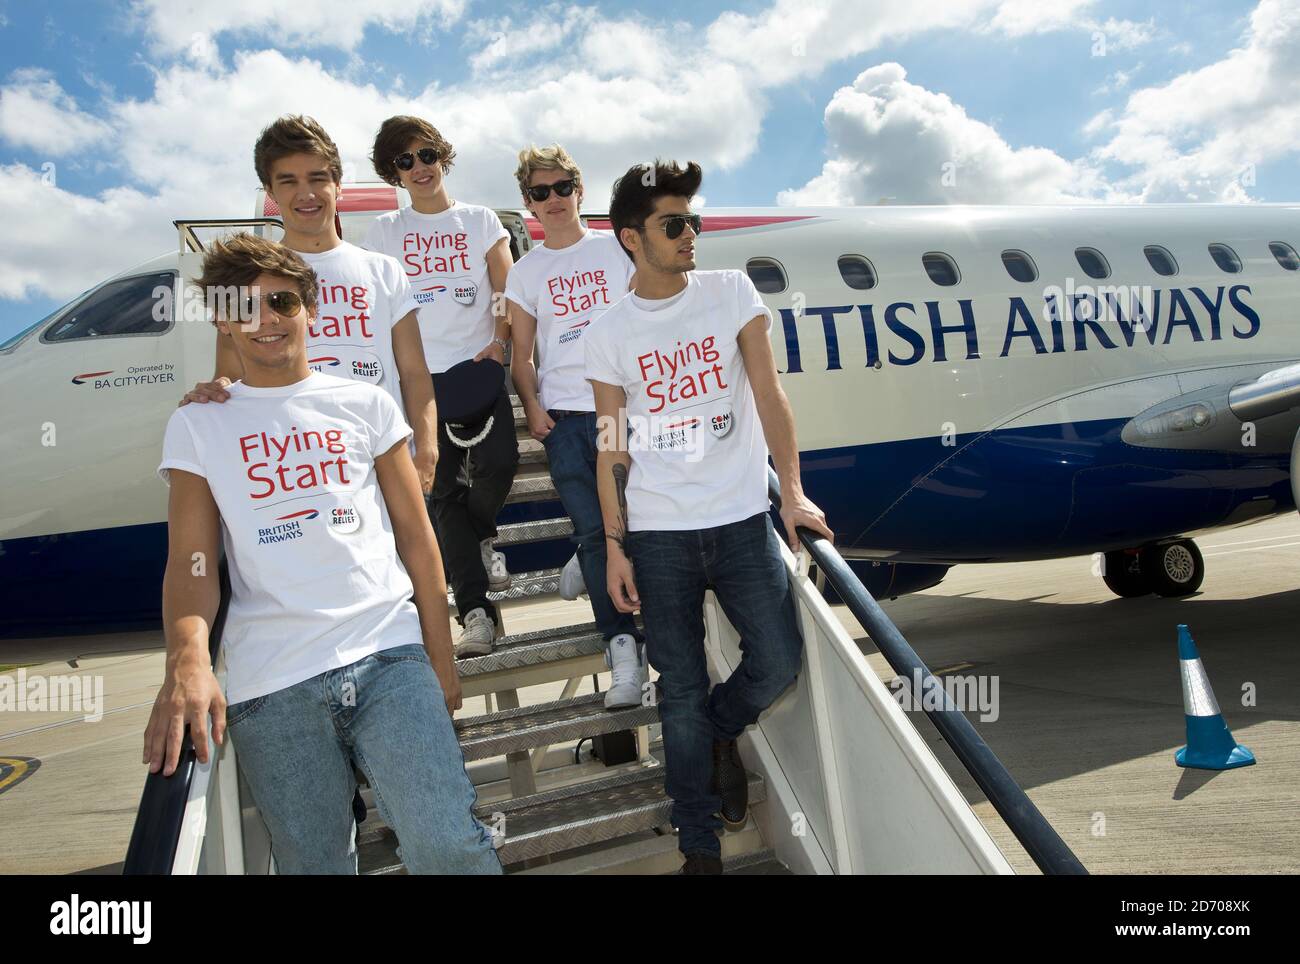 One Direction L R Louis Tomlinson Liam Payne Harry Styles Niall Horan And Zayn Malik Pictured Before They Board Flight Ba1d A Private Charter Flight From London To Manchester Hosted By The